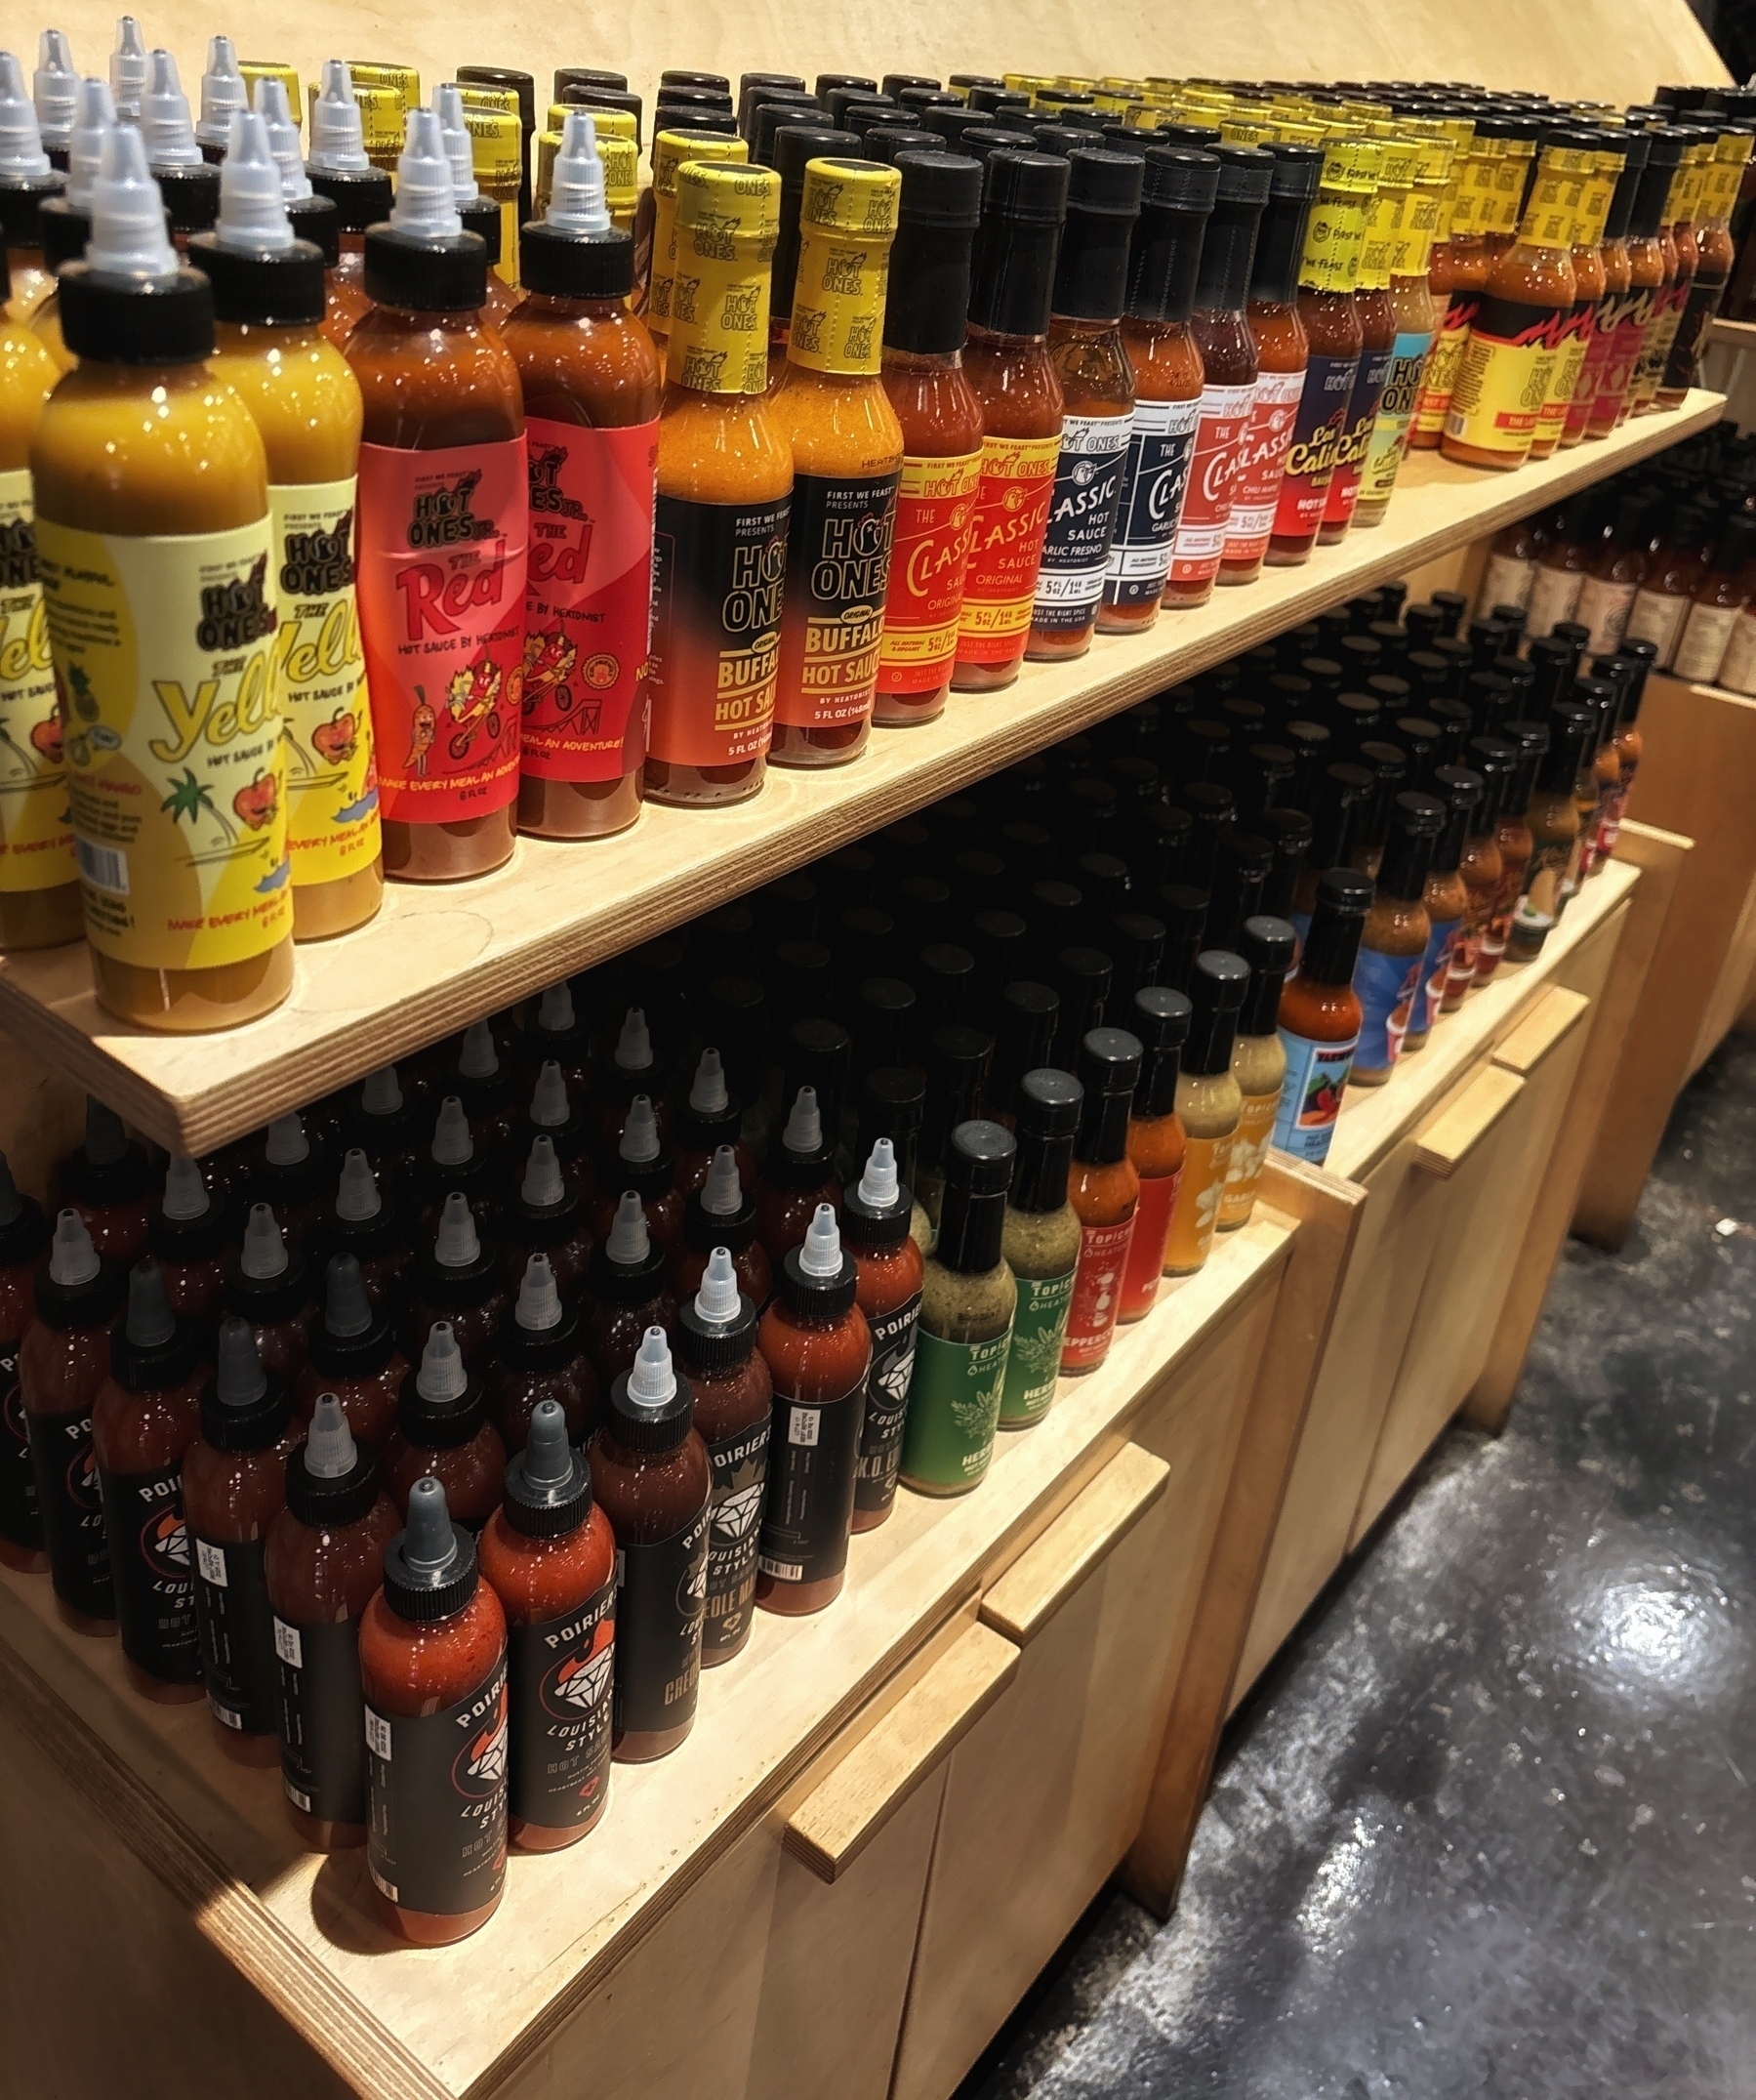 Two rows of hot sauces in various colors on wooden shelves